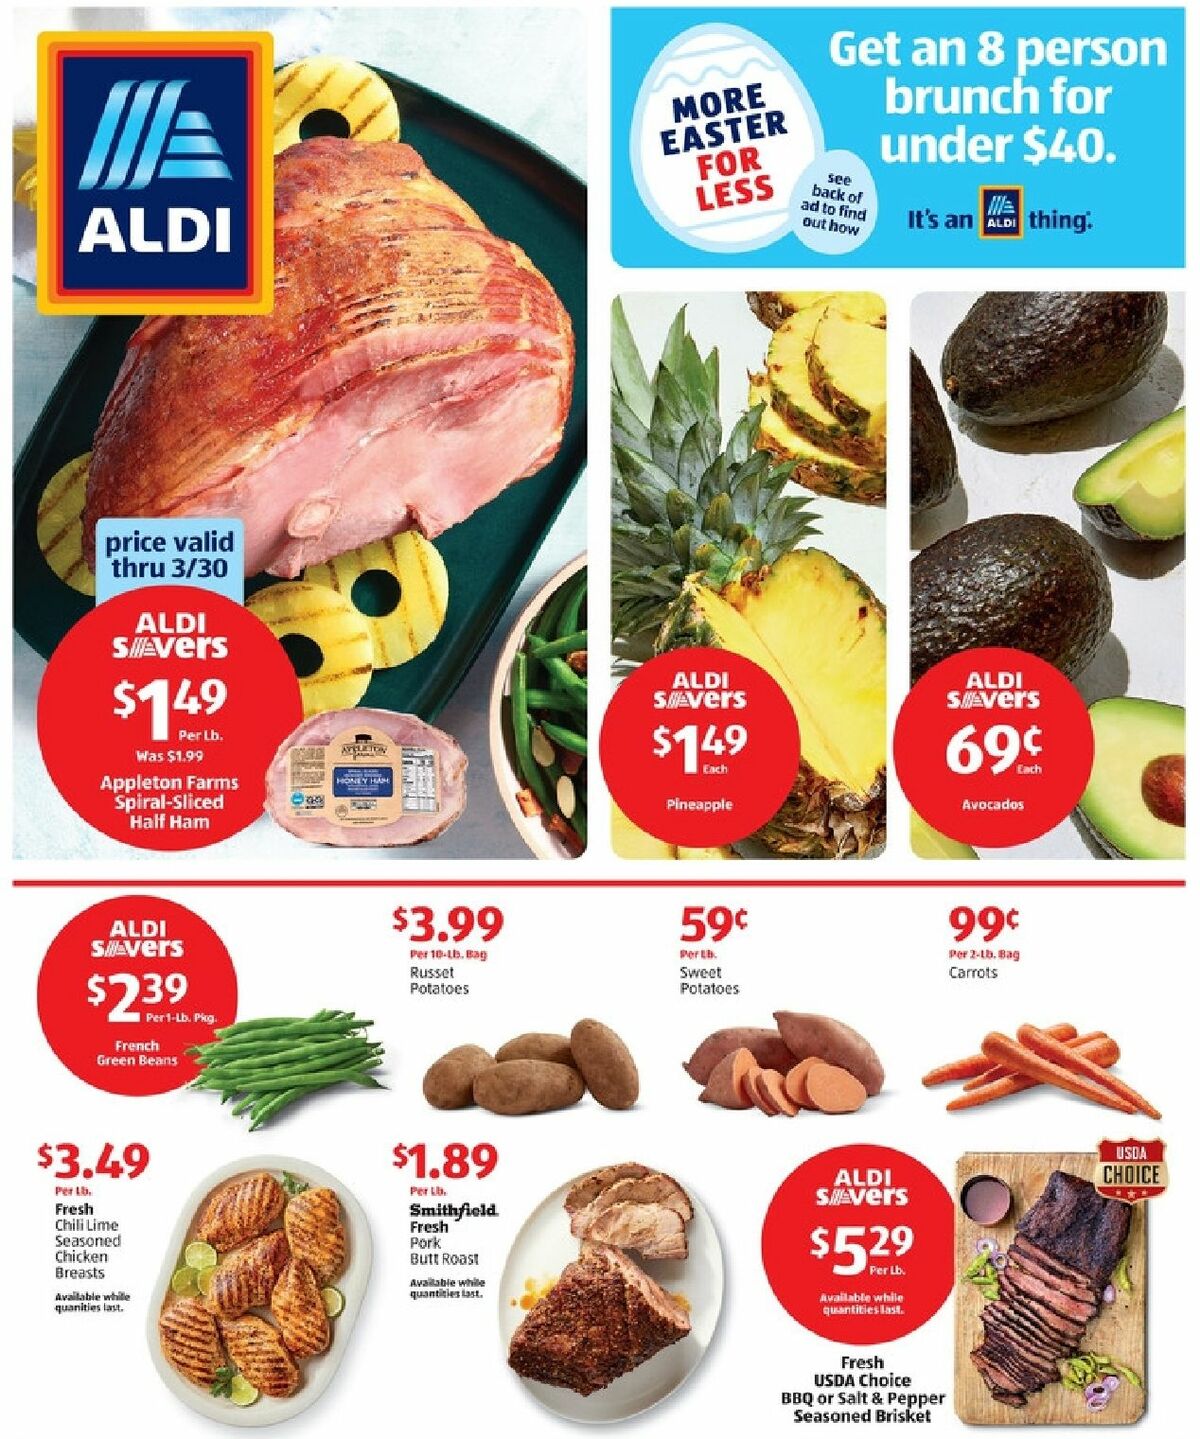 ALDI Weekly Ad from March 27